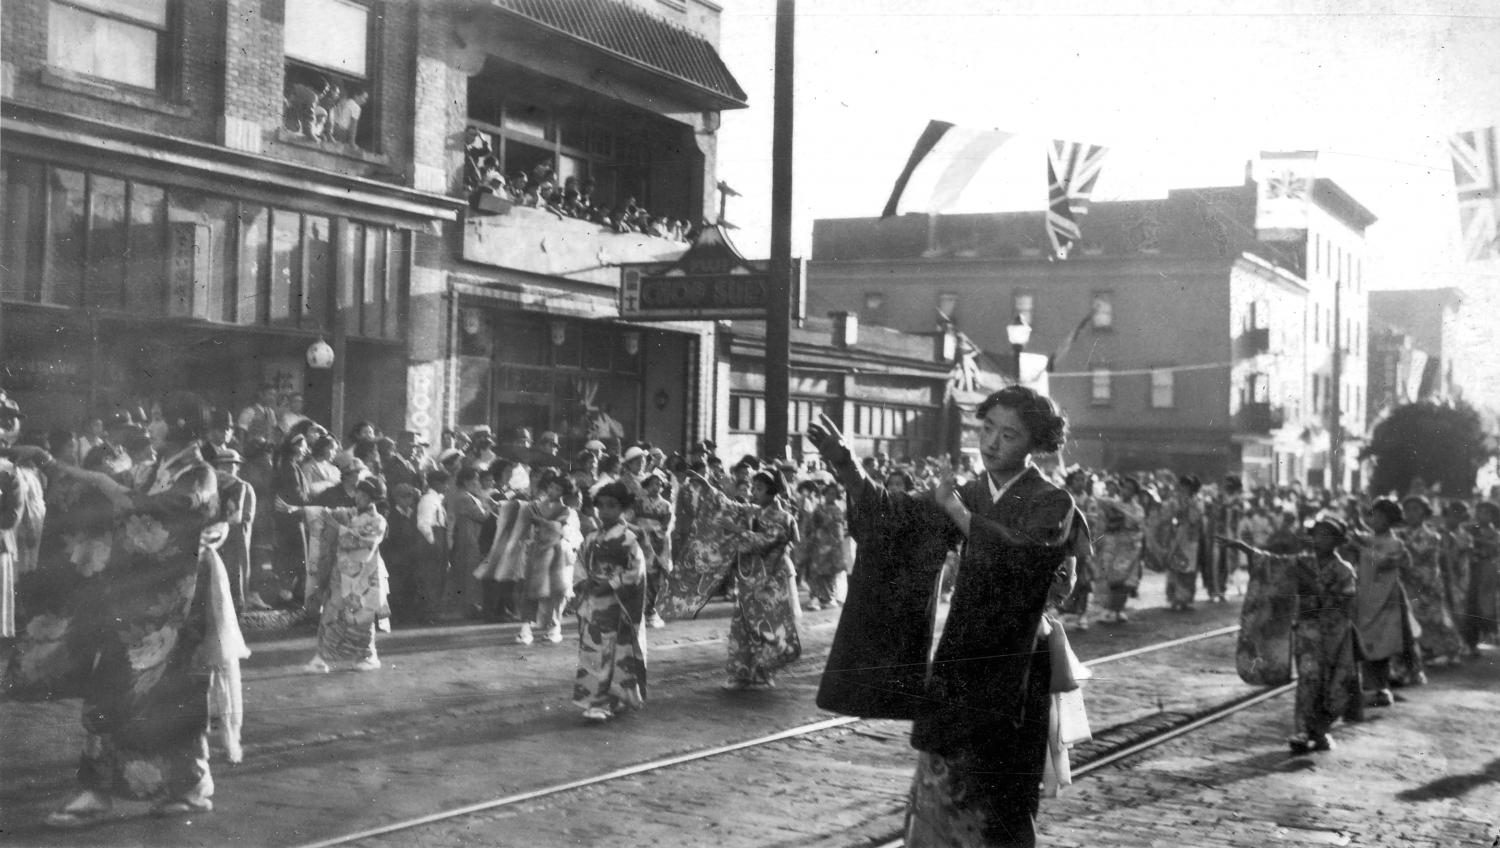 Japanese women in traditional dress participate in a parade along Powell Street.